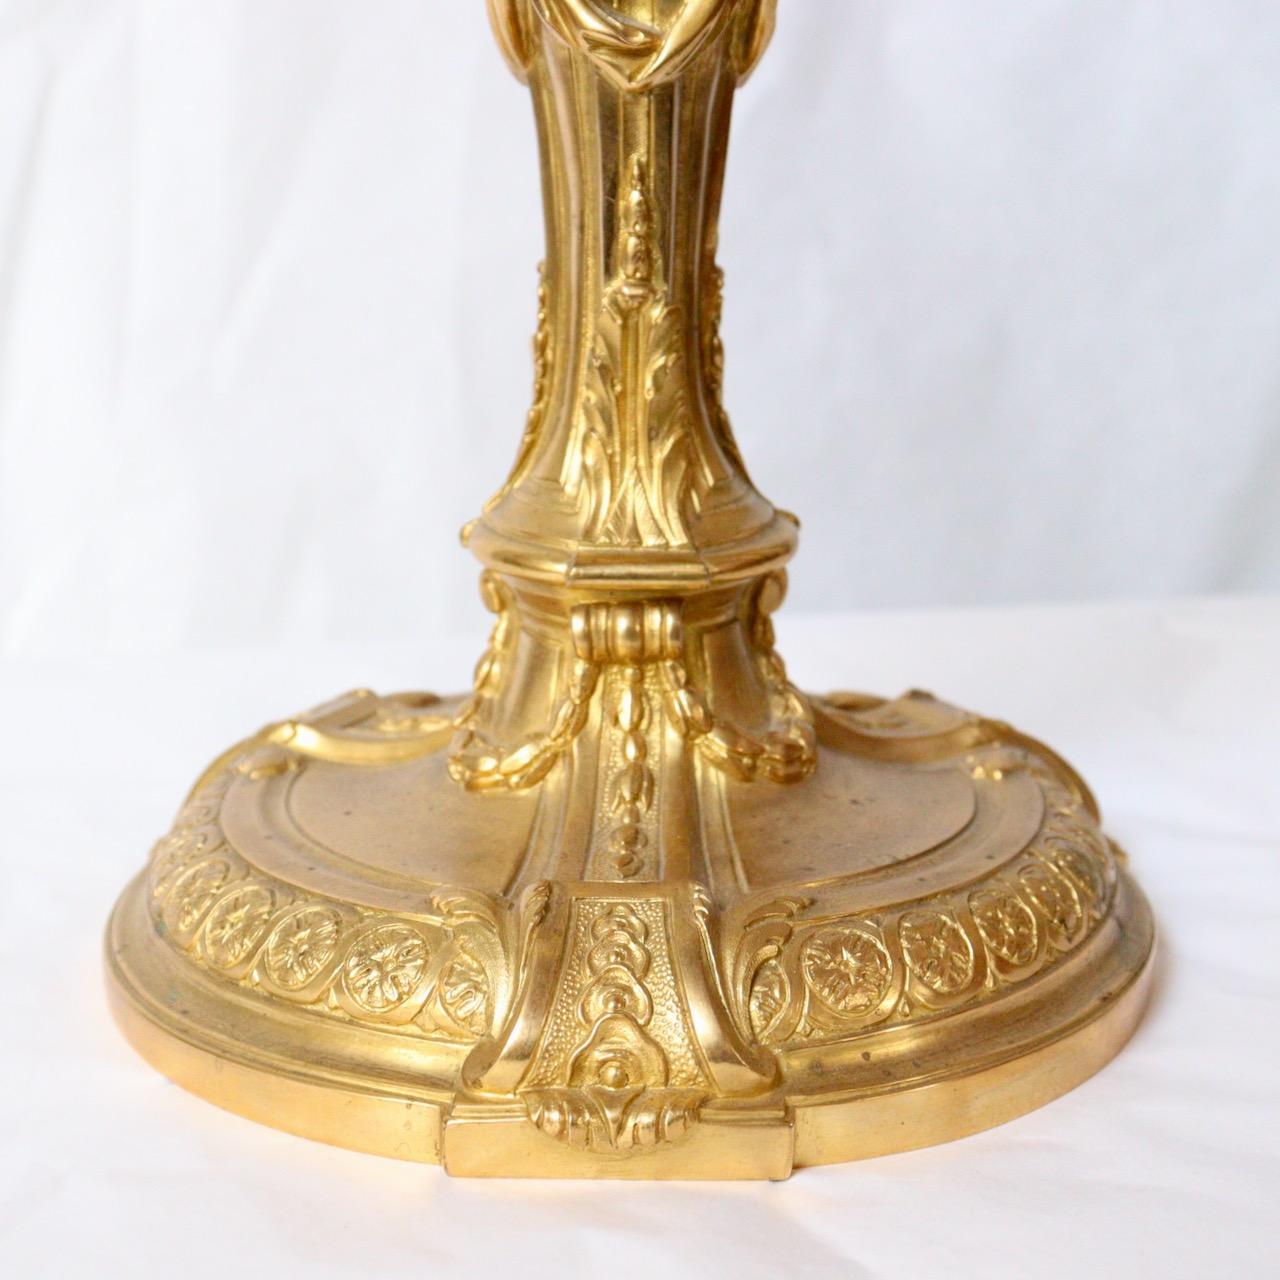 A Pair of Second Half 19th Century French Ormolu Louis XVI Style Candlesticks  13